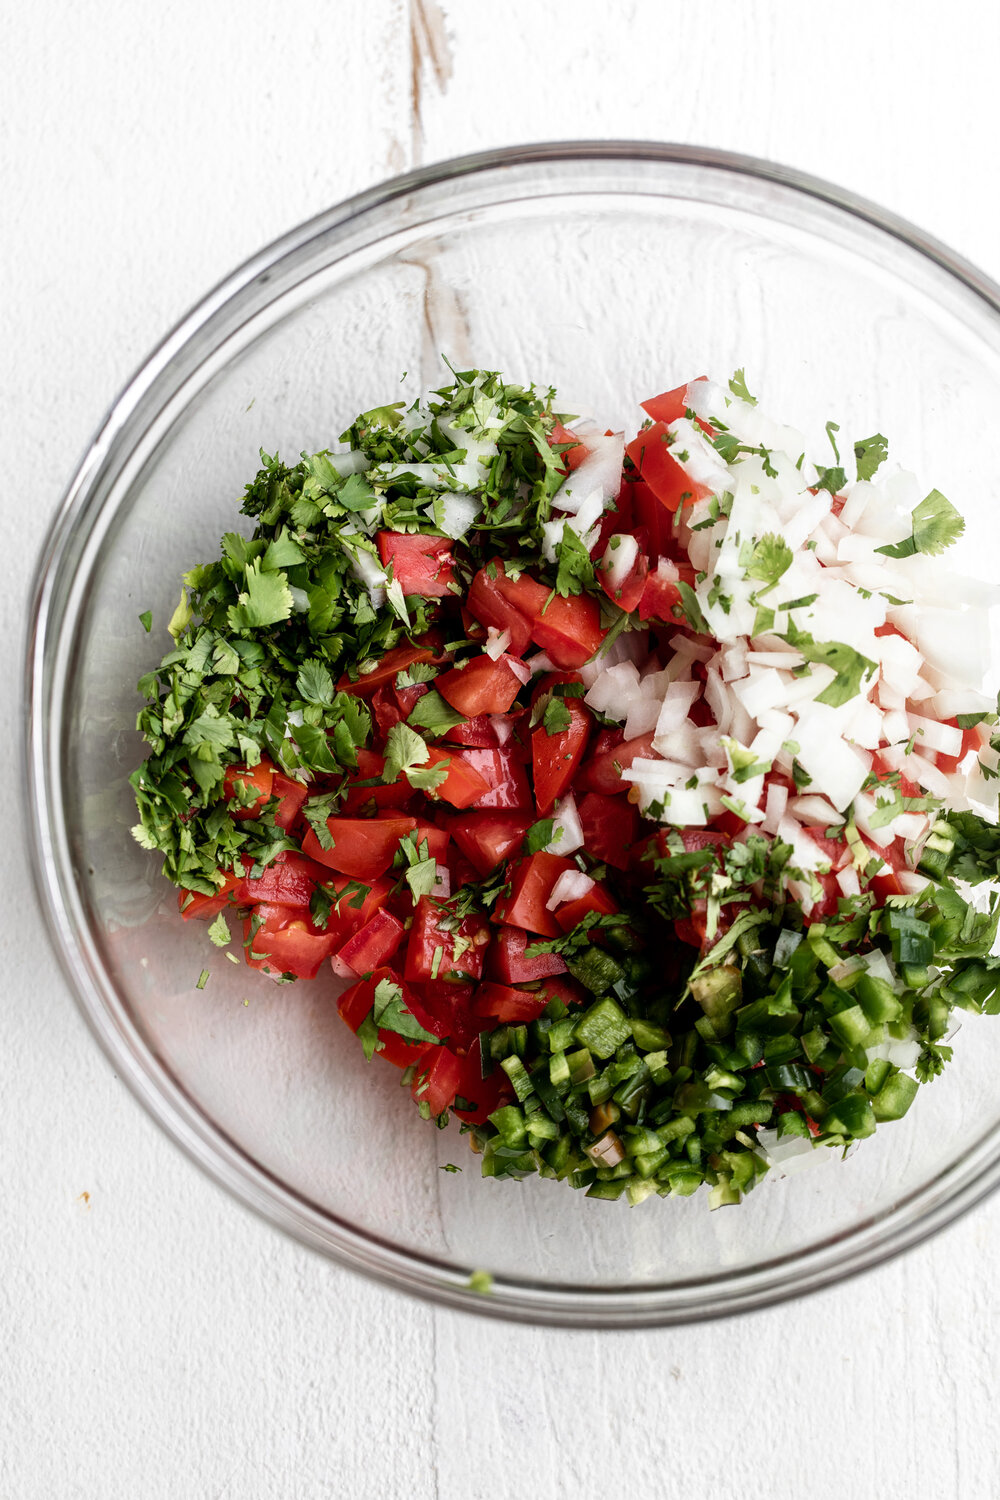 pico de gallo ingredients diced tomatoes onions jalapeño and cilantro with lime in mixing bowl